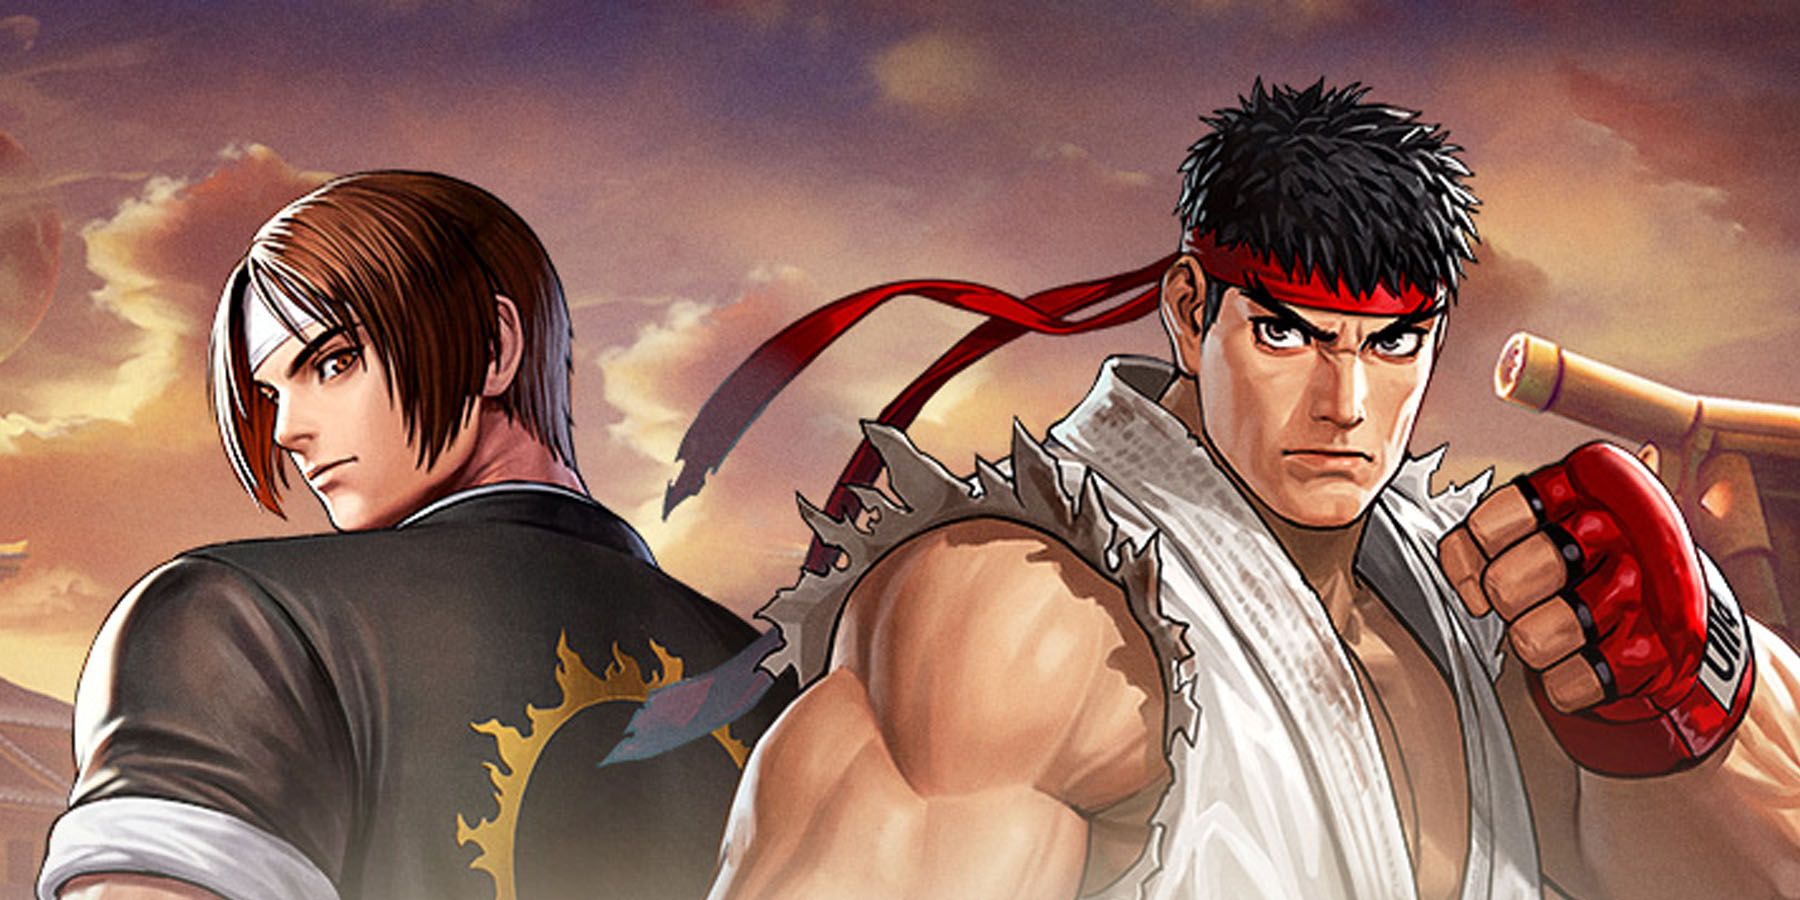 Street Fighter is Collaborating With King of Fighters Mobile Game